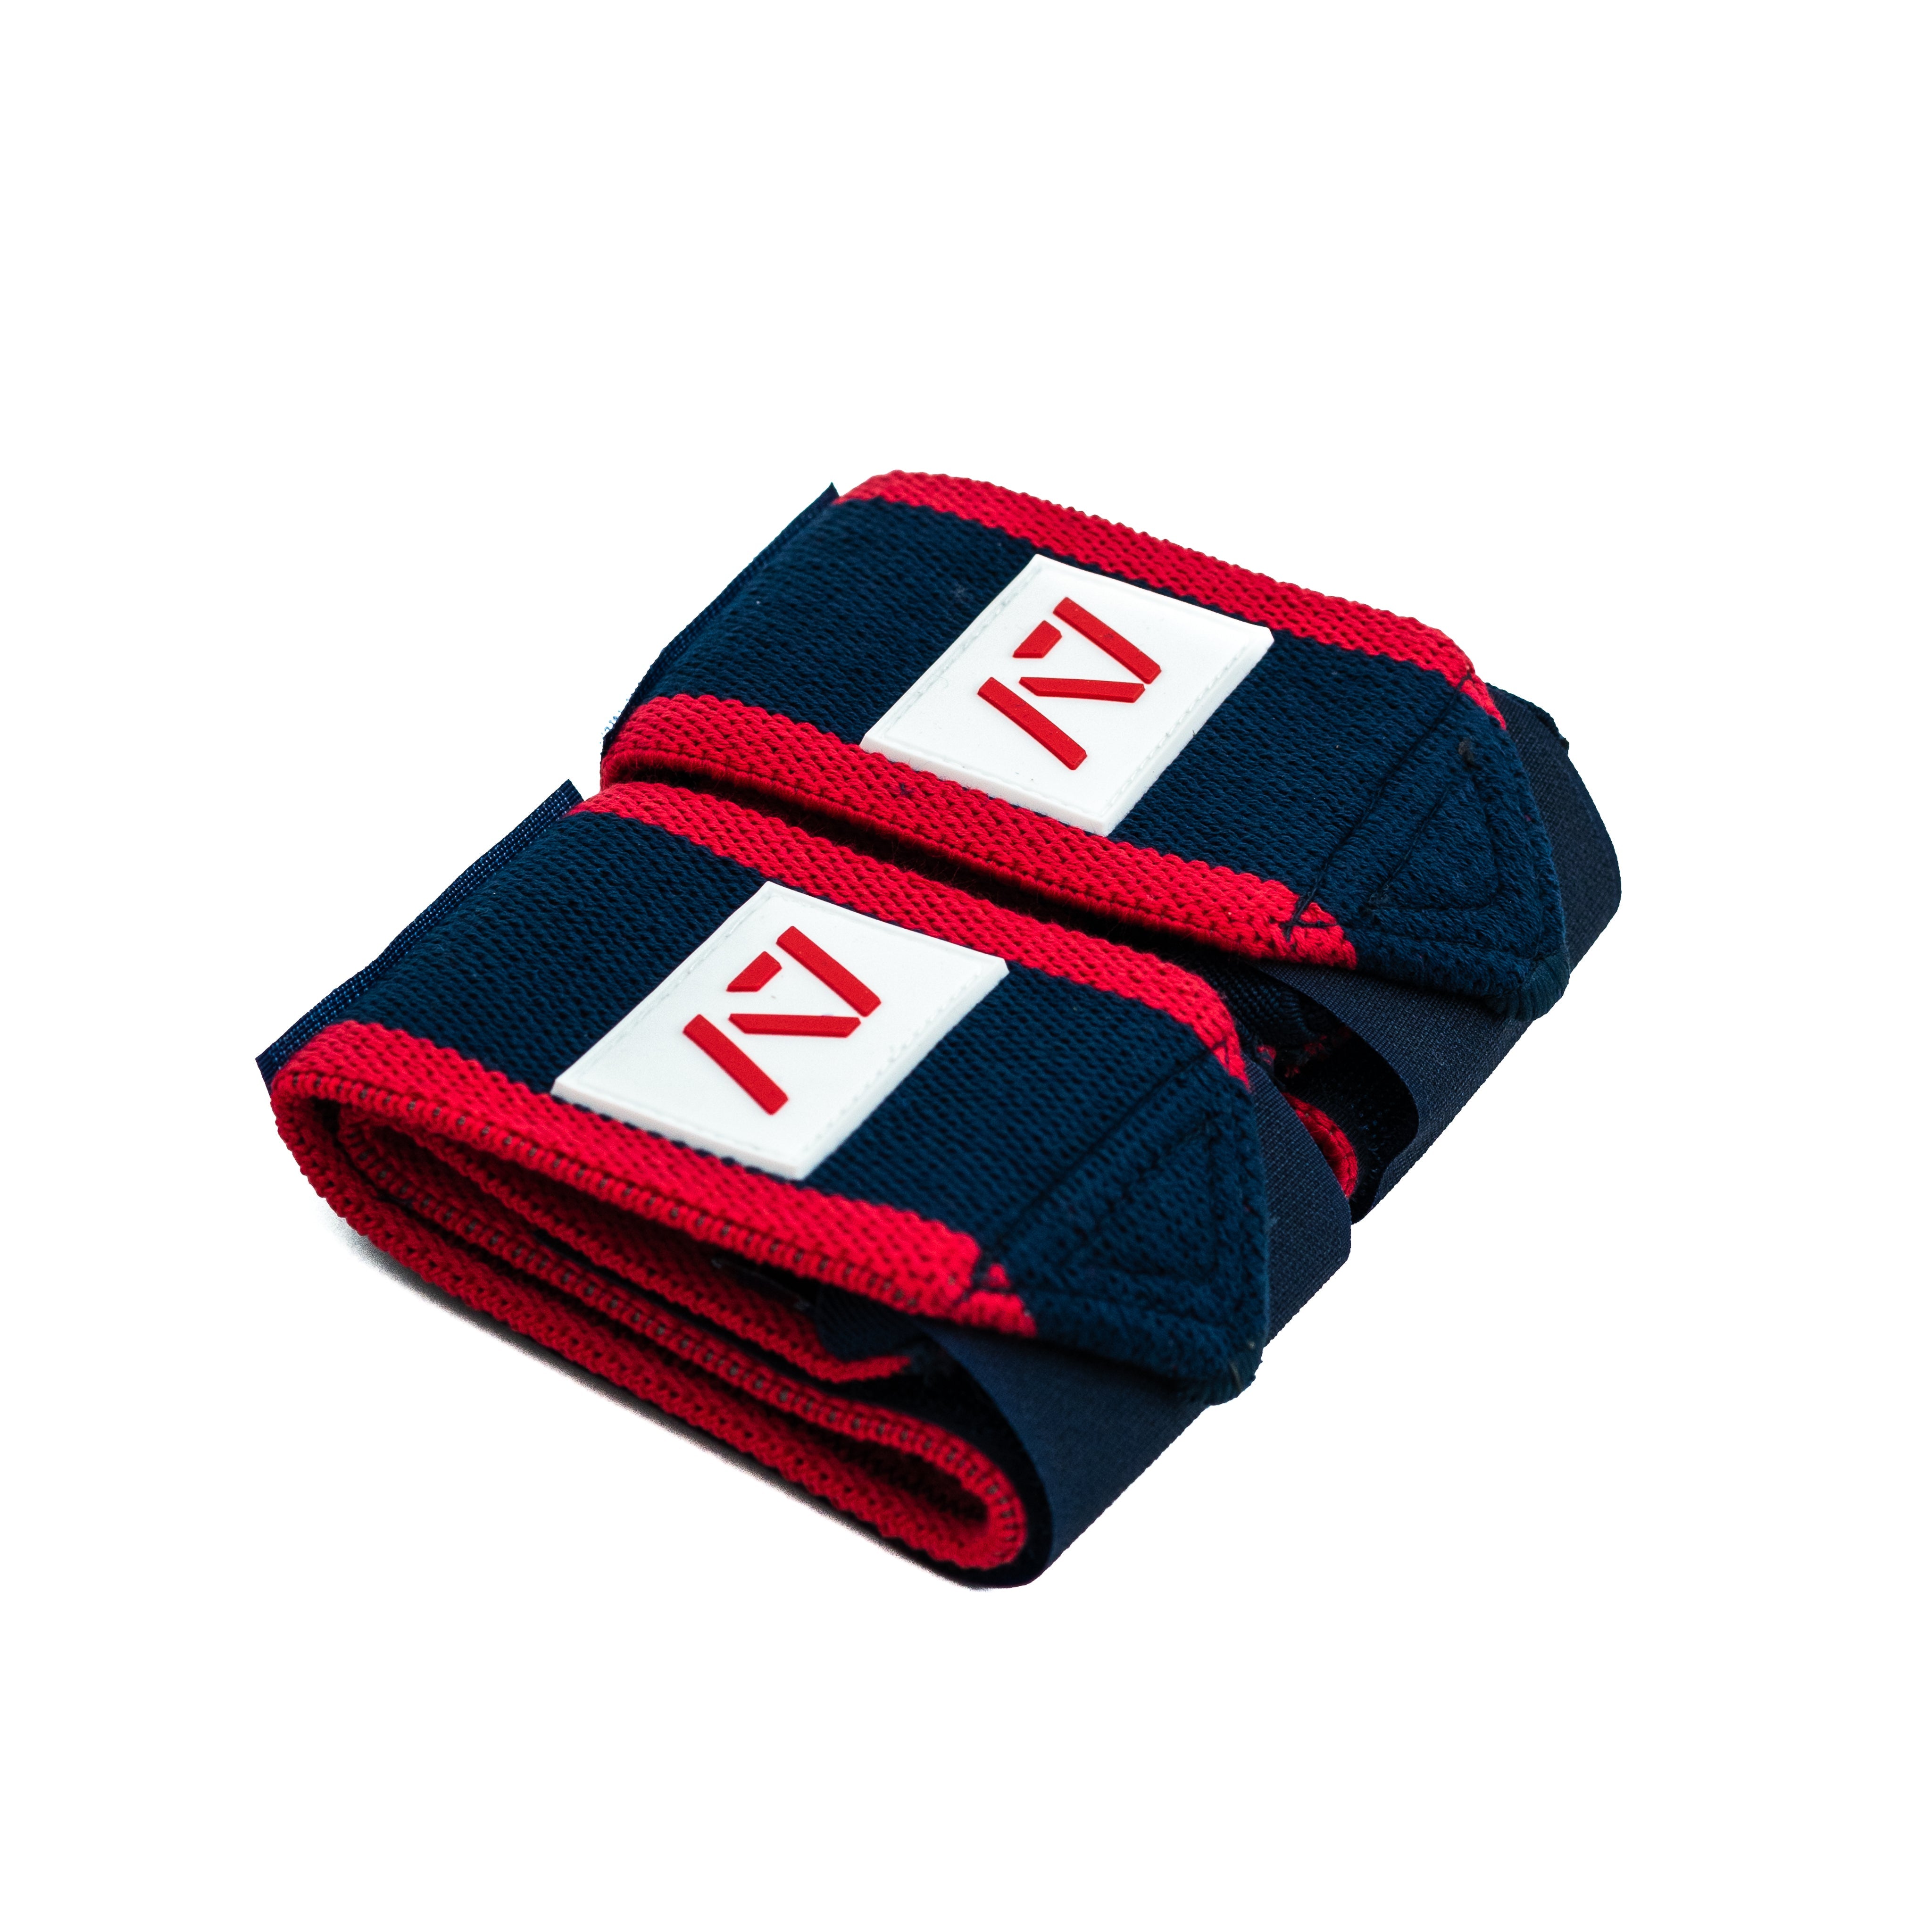 The Red, White & Blue (RWB) colourway stands out on the platform, while still providing the level of quality, support and comfort you demand from your products. These wrist wraps are a perfect addition to your IPF approved kit.